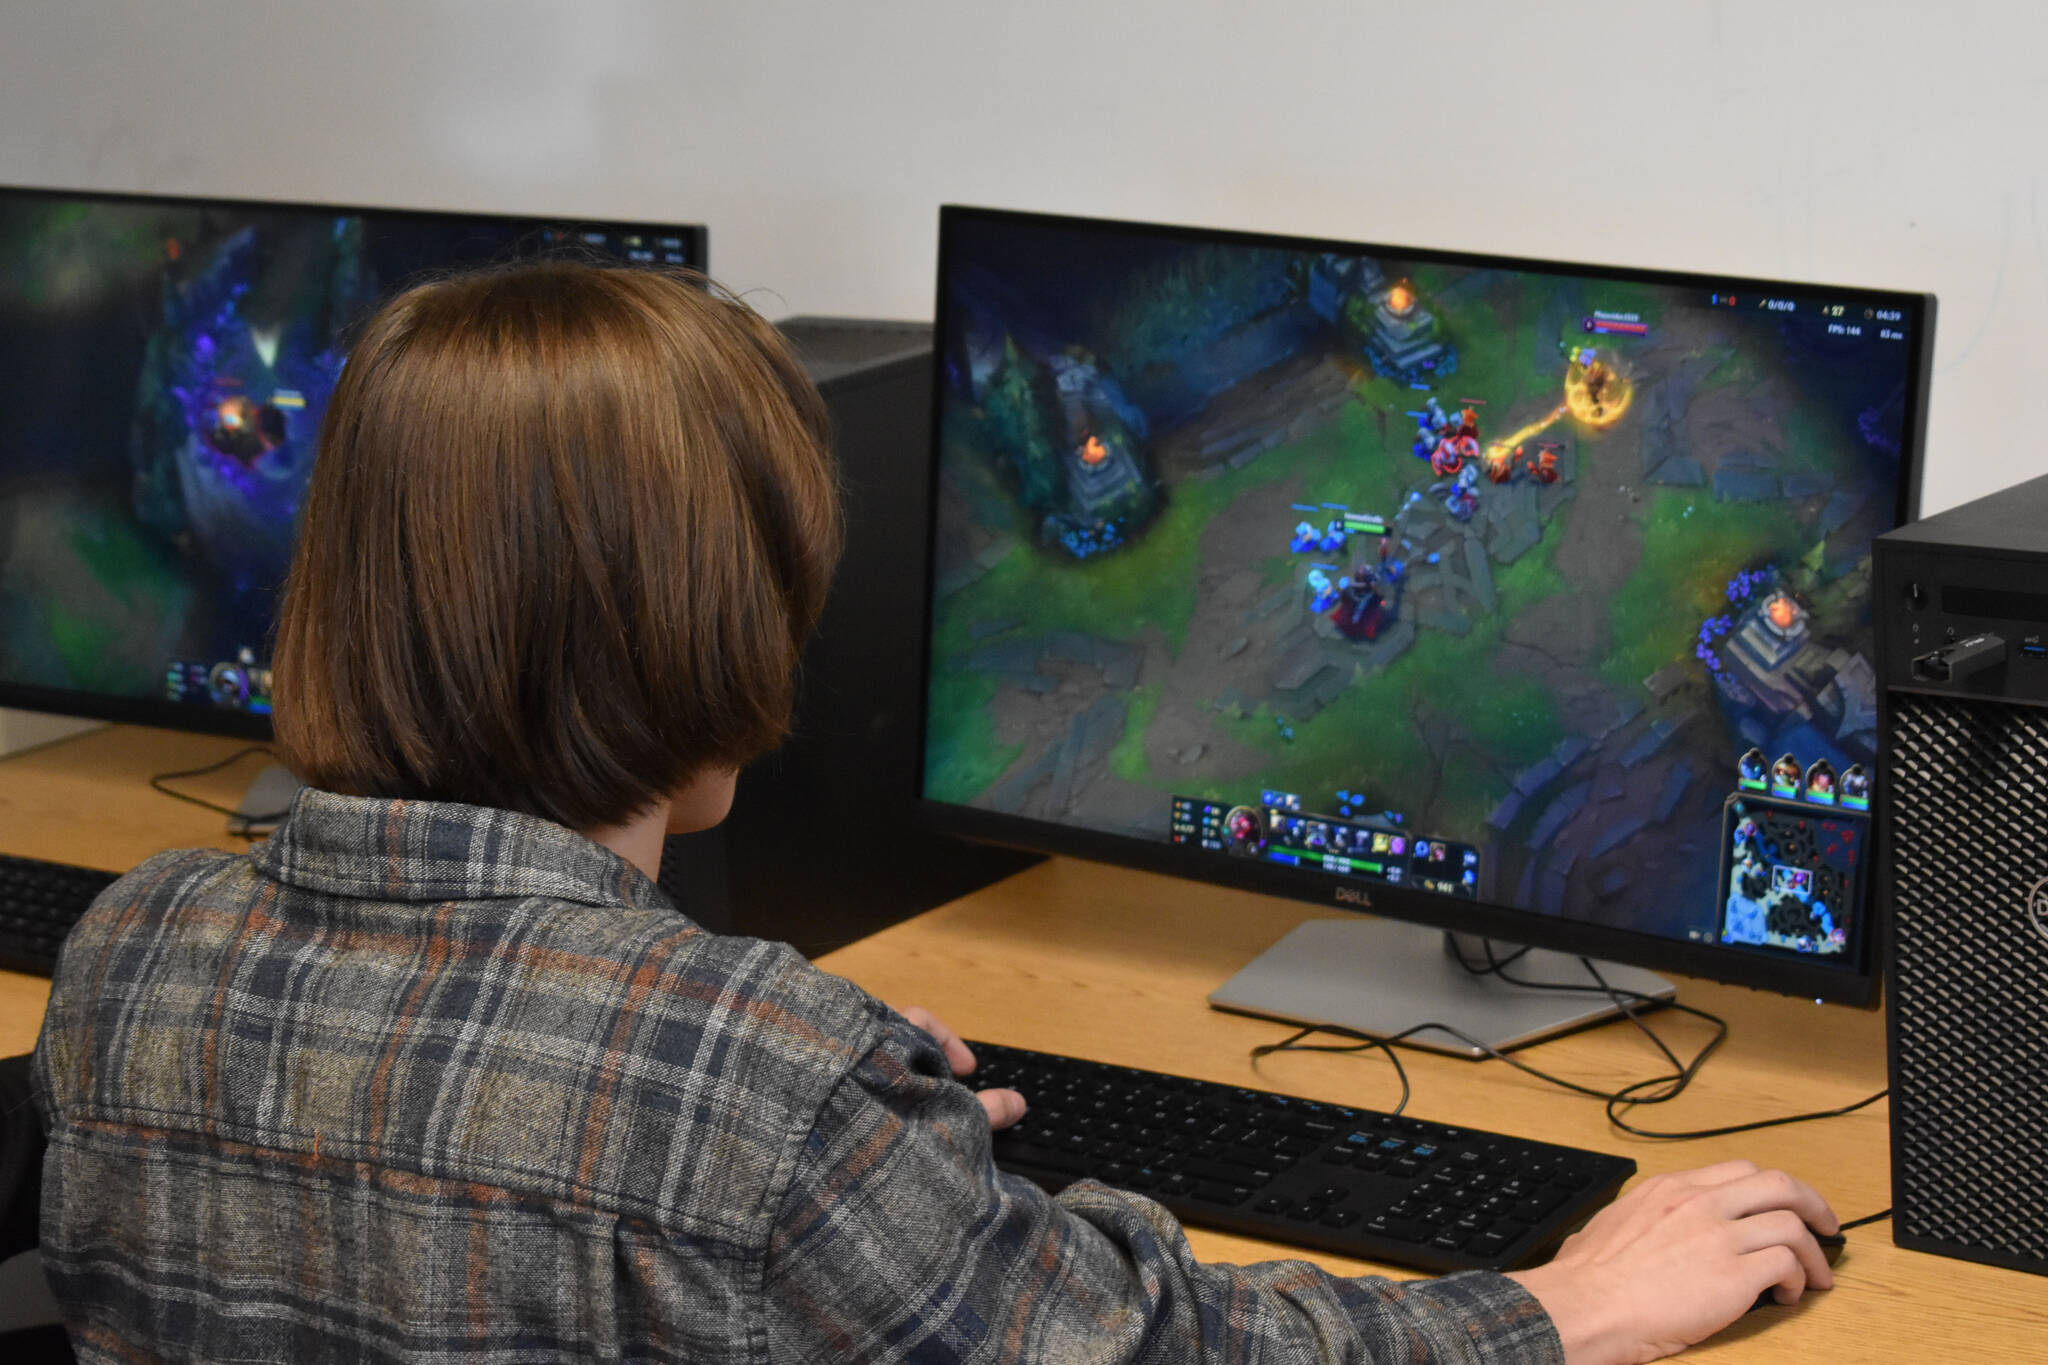 Cody Good competes for Kenai Central High School during a League of Legends match against Anchorage Christian Schools on Tuesday, Sept. 23, 2022 at Kenai Central High School in Kenai, Alaska. (Jake Dye/Peninsula Clarion)